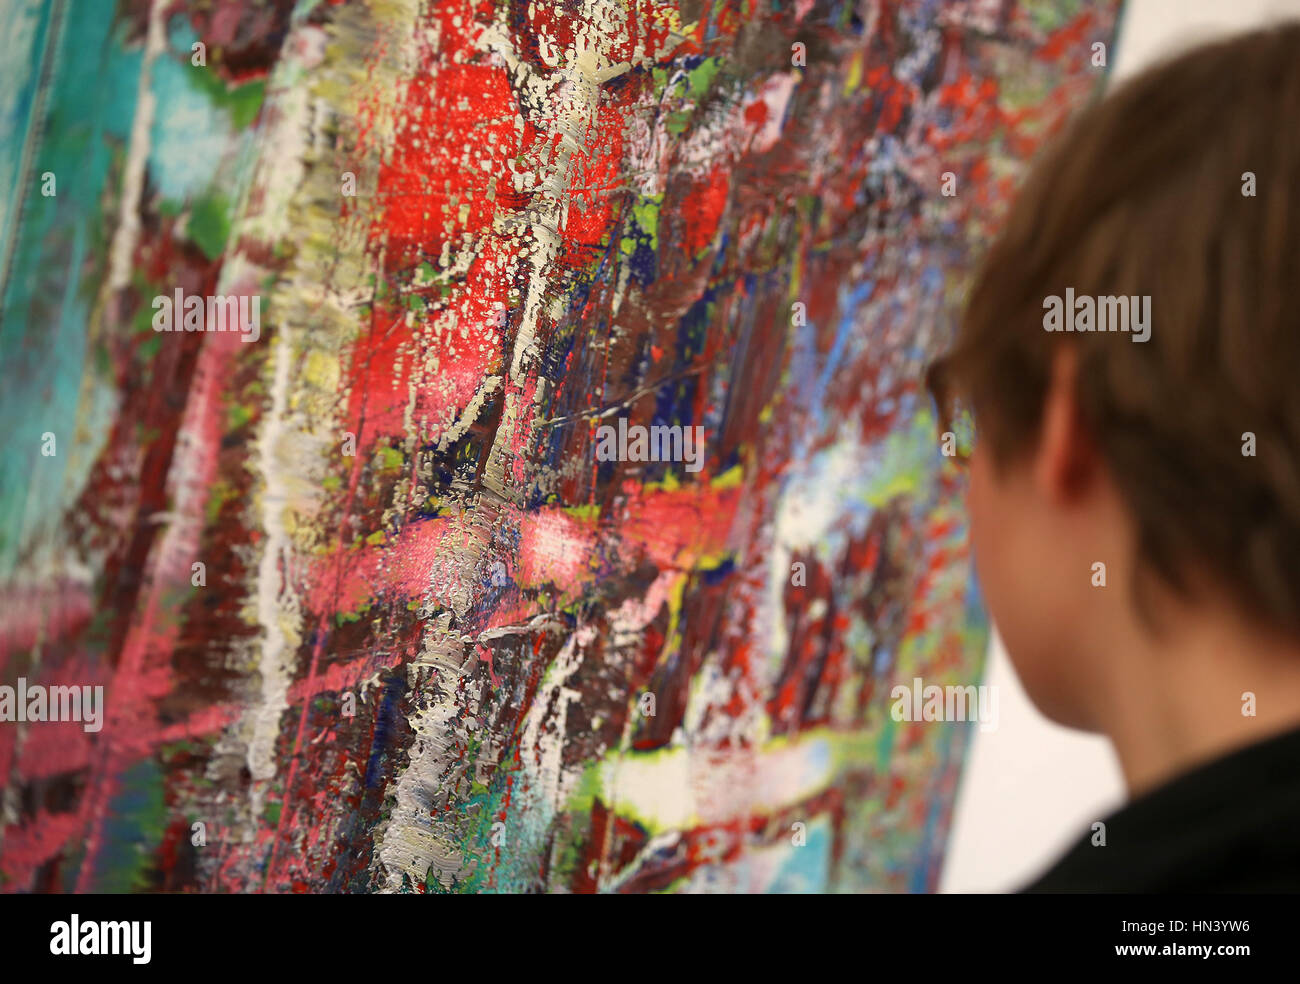 Cologne, Germany. 7th Feb, 2017. A woman gazes at the painting 'Abstraktes Bild' from Gerhard Richter in Cologne, Germany, 7 February 2017. The exhibition 'New Pictures' for Richter's 85th birthday will be opened on the 9 February 2017 at the Museum Ludwig. Photo: Oliver Berg/dpa/Alamy Live News Stock Photo